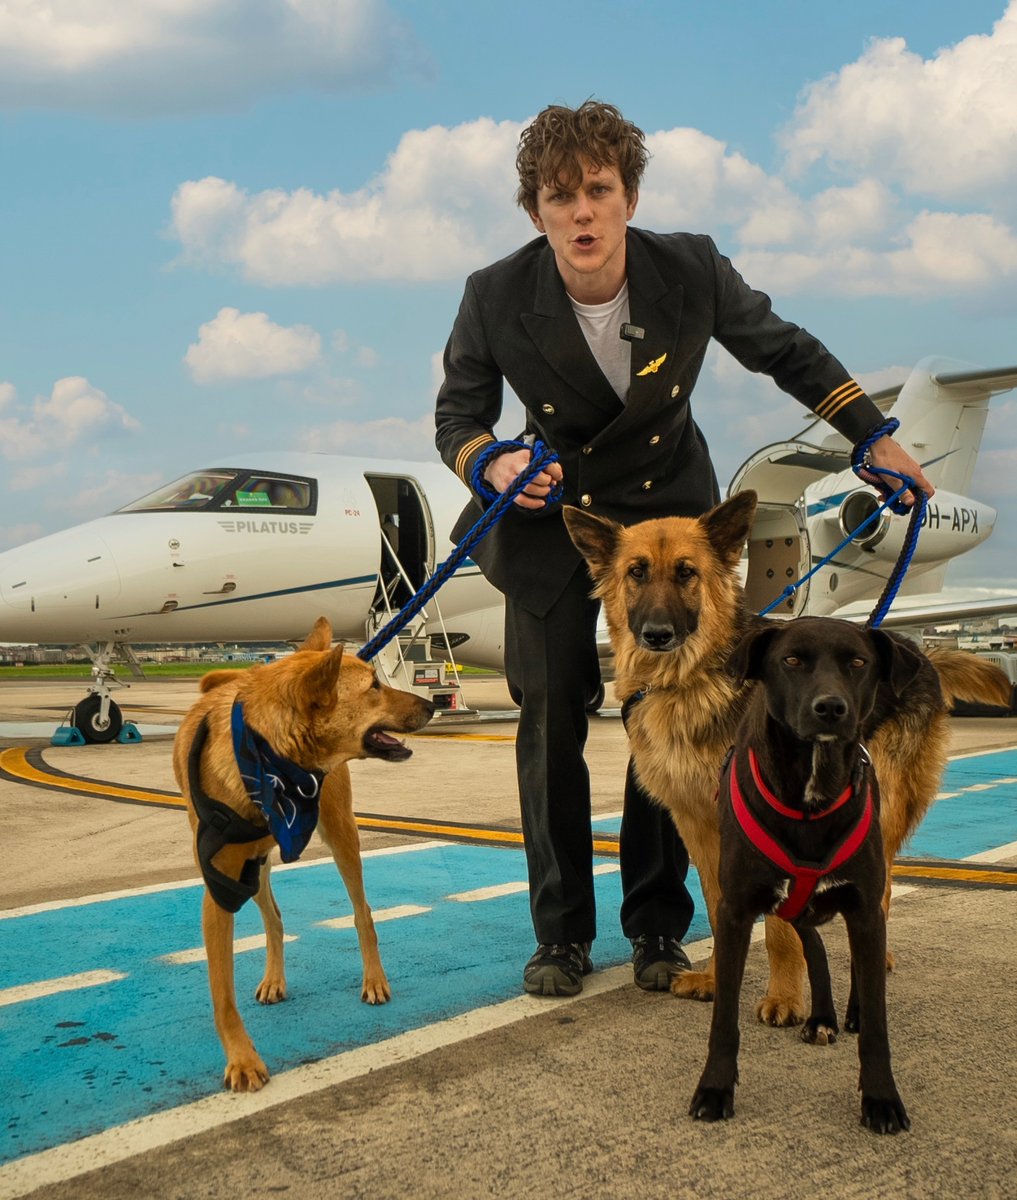 I rescued stray dogs on a private jet youtu.be/nznjDnYm5aI?si…